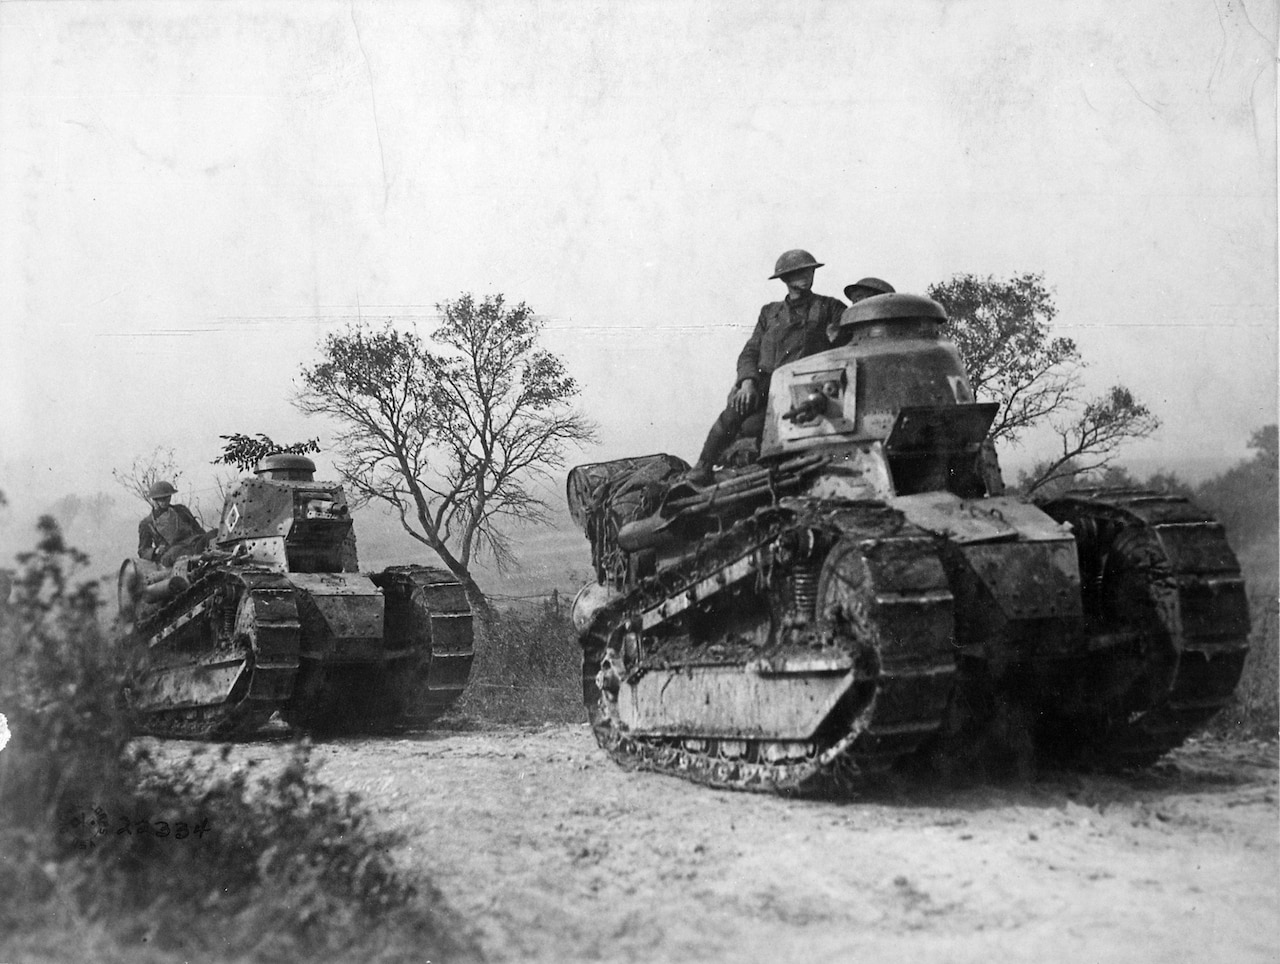 American tanks and soldiers on a road in France.